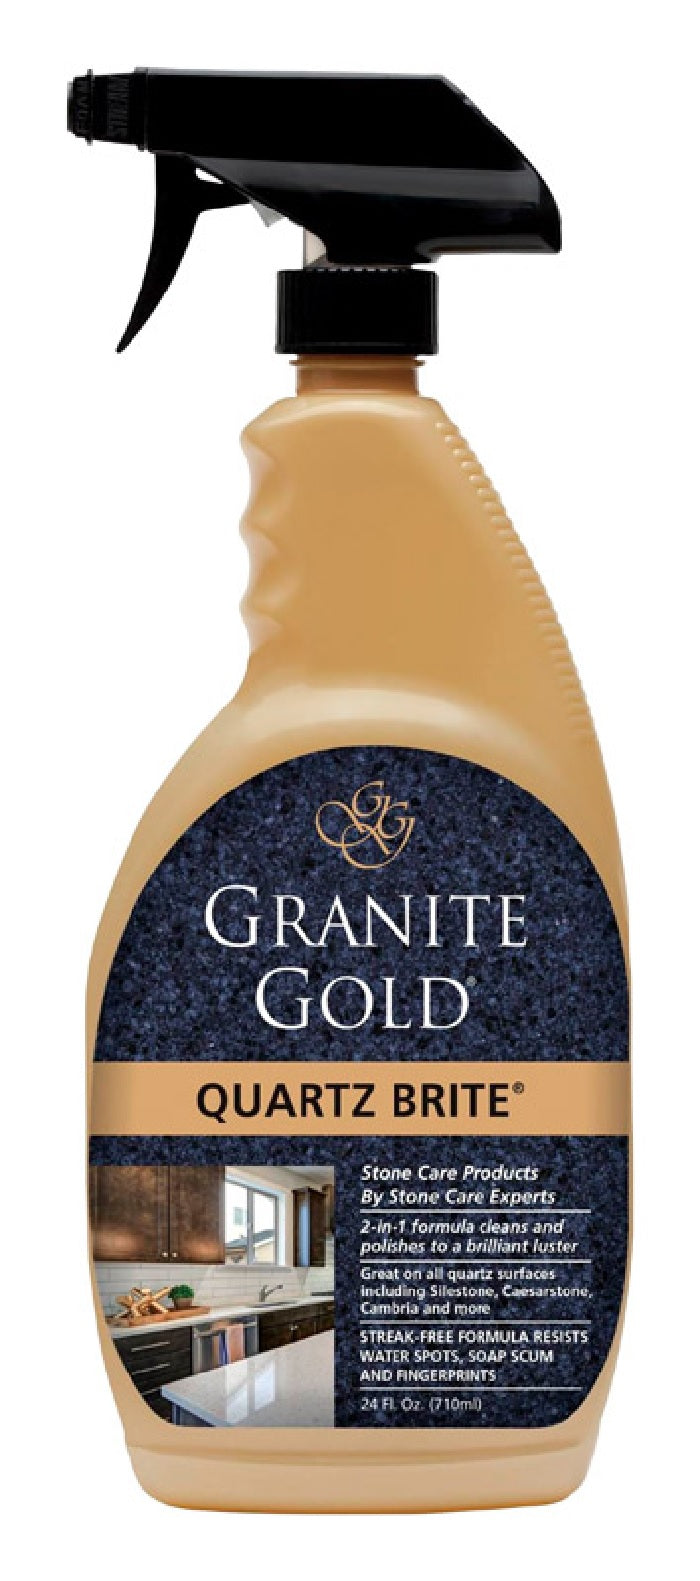 Buy quartz brite - Online store for chemicals & cleaners, specialty cleaners in USA, on sale, low price, discount deals, coupon code